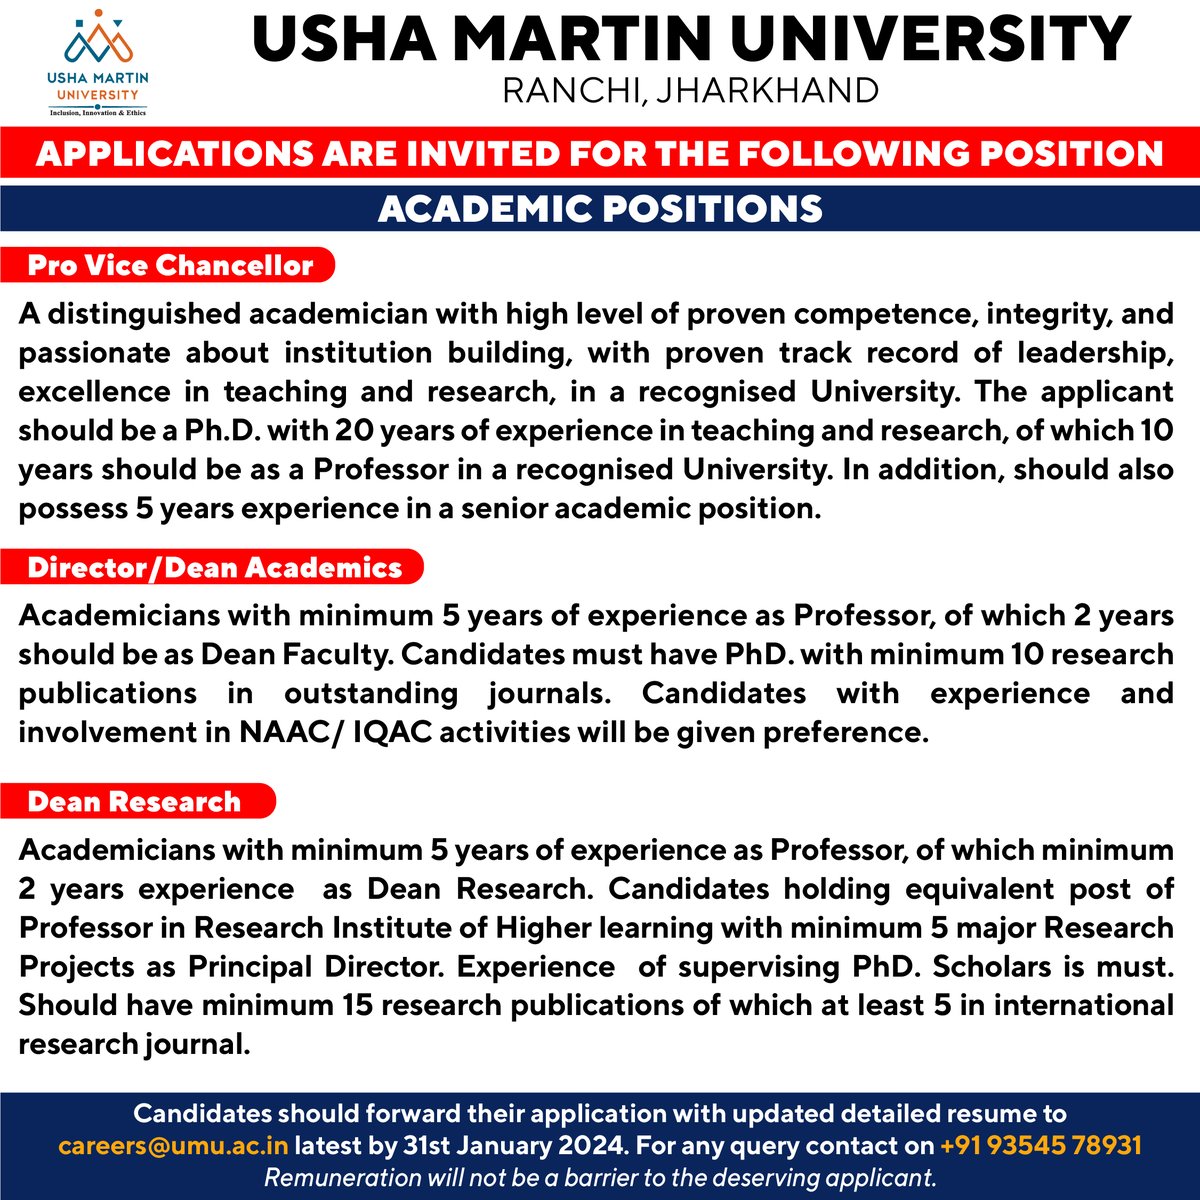 UMU invites Applications for Academic Positions. All eligible and deserving candidates must e-mail their Curriculum Vitae / Resume to careers@umu.ac.in by 31st January 2024. 
Apply Now: umu.ac.in/career/
#academicpositions #Hiring